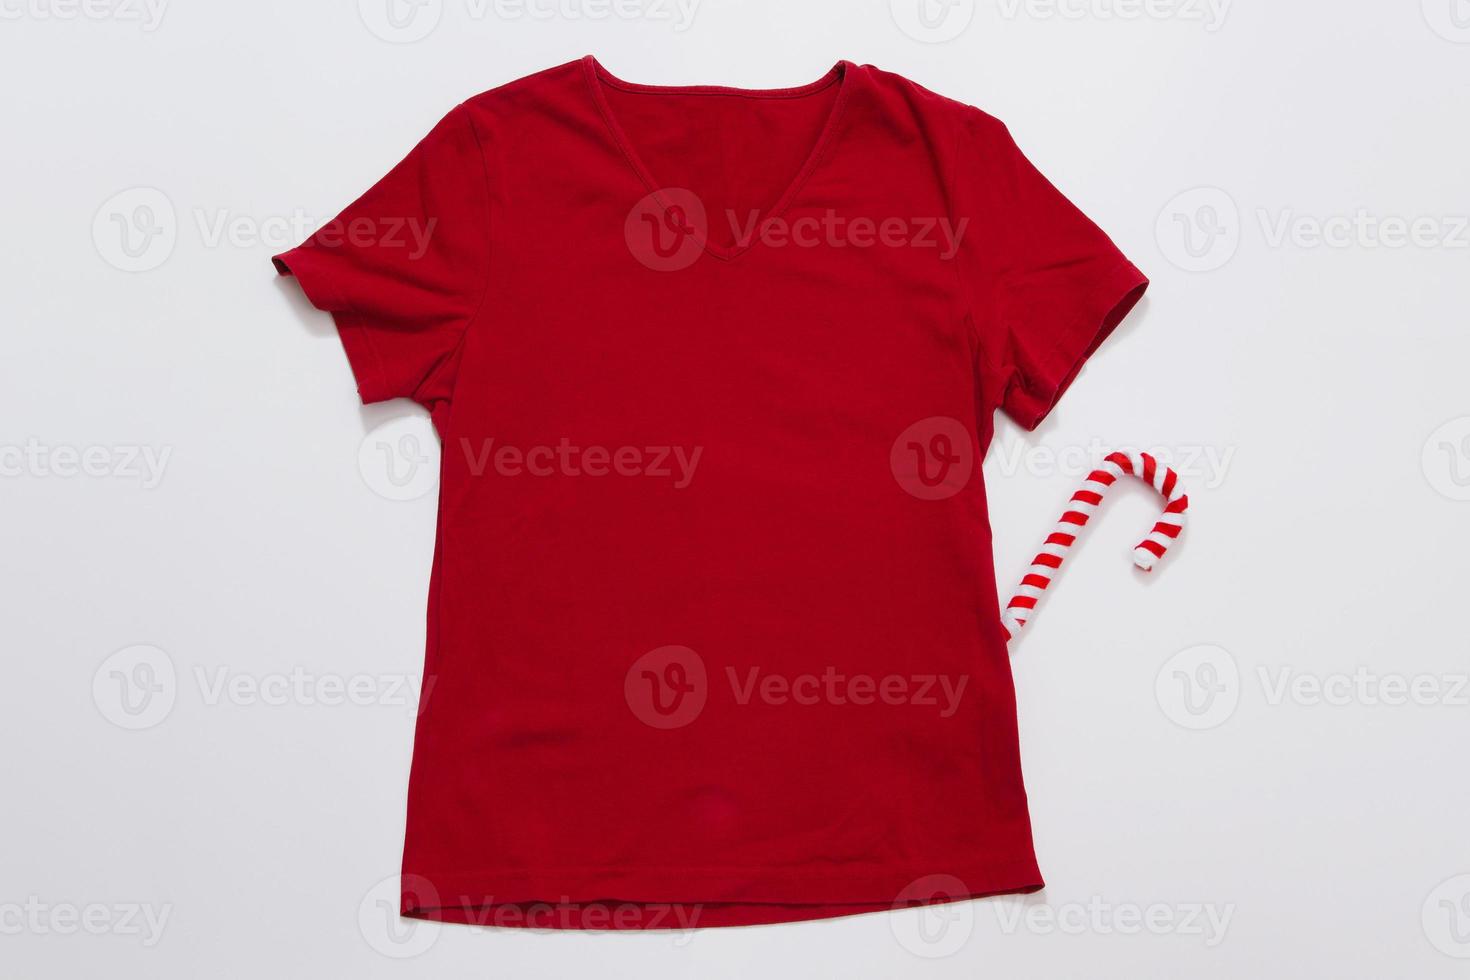 Close up red blank template t shirt with copy space. Christmas Holiday concept. Top view mockup t-shirt. holidays decorations white background. Happy New Year accessories. Xmas outfit. Selective focus photo